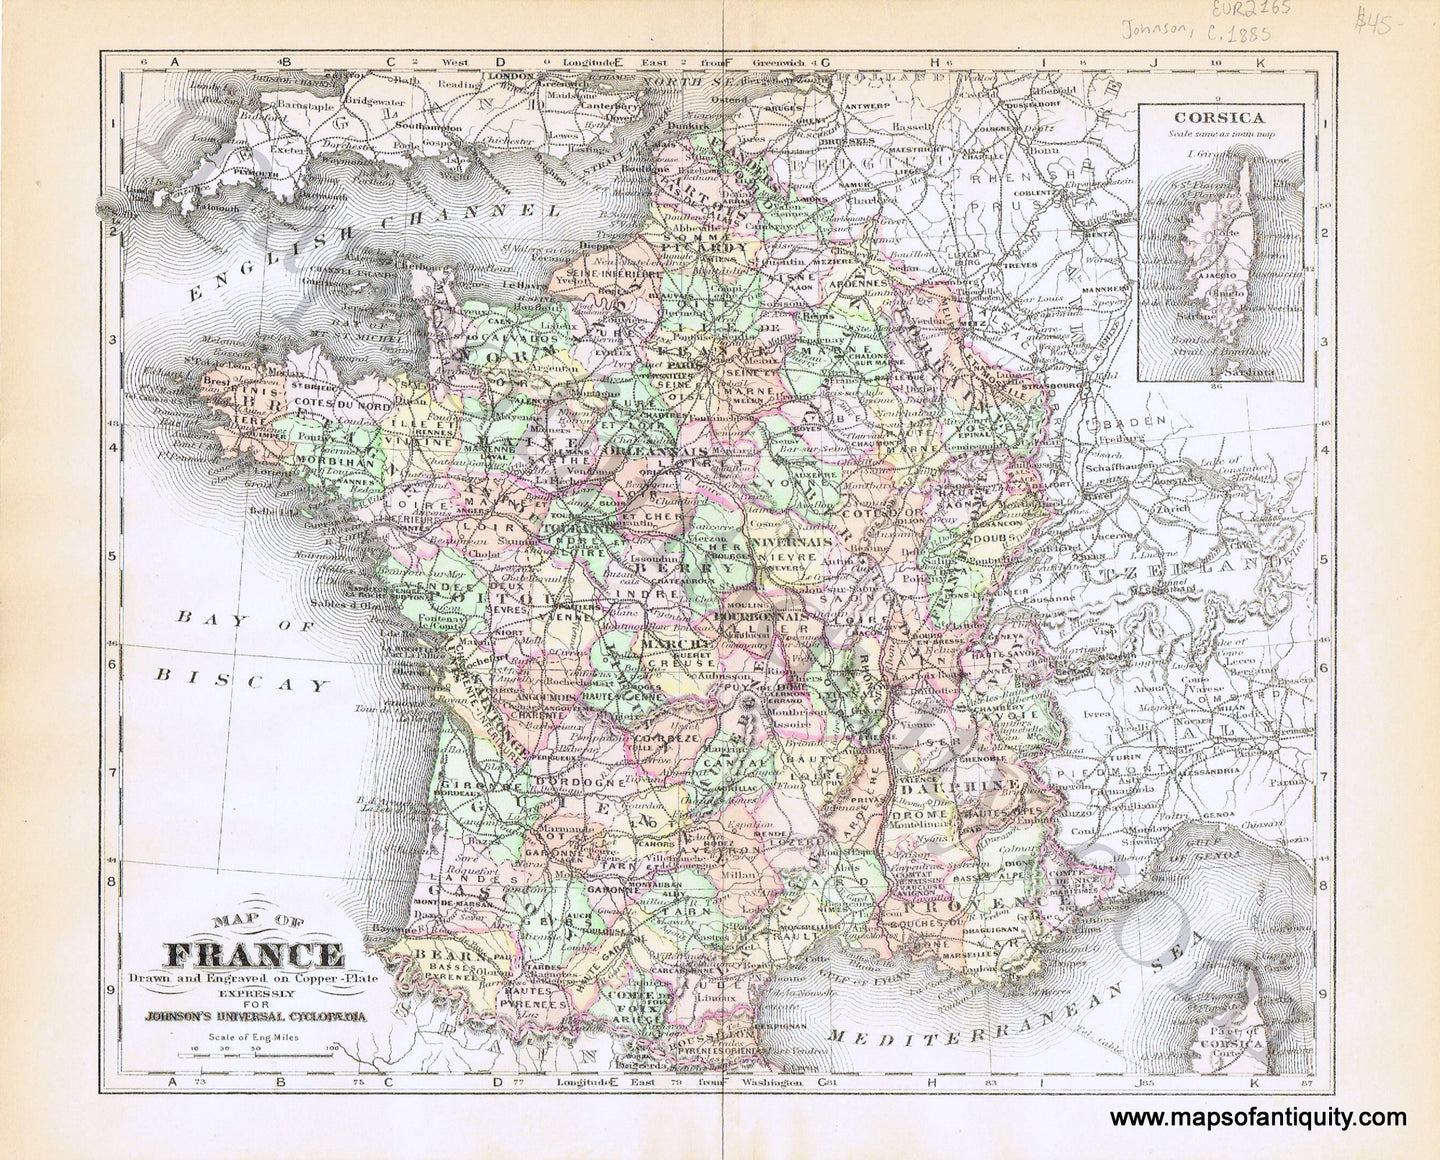 Antique-Hand-Colored-Map-Map-of-France-Europe-France-c.-1885-Johnson-Maps-Of-Antiquity